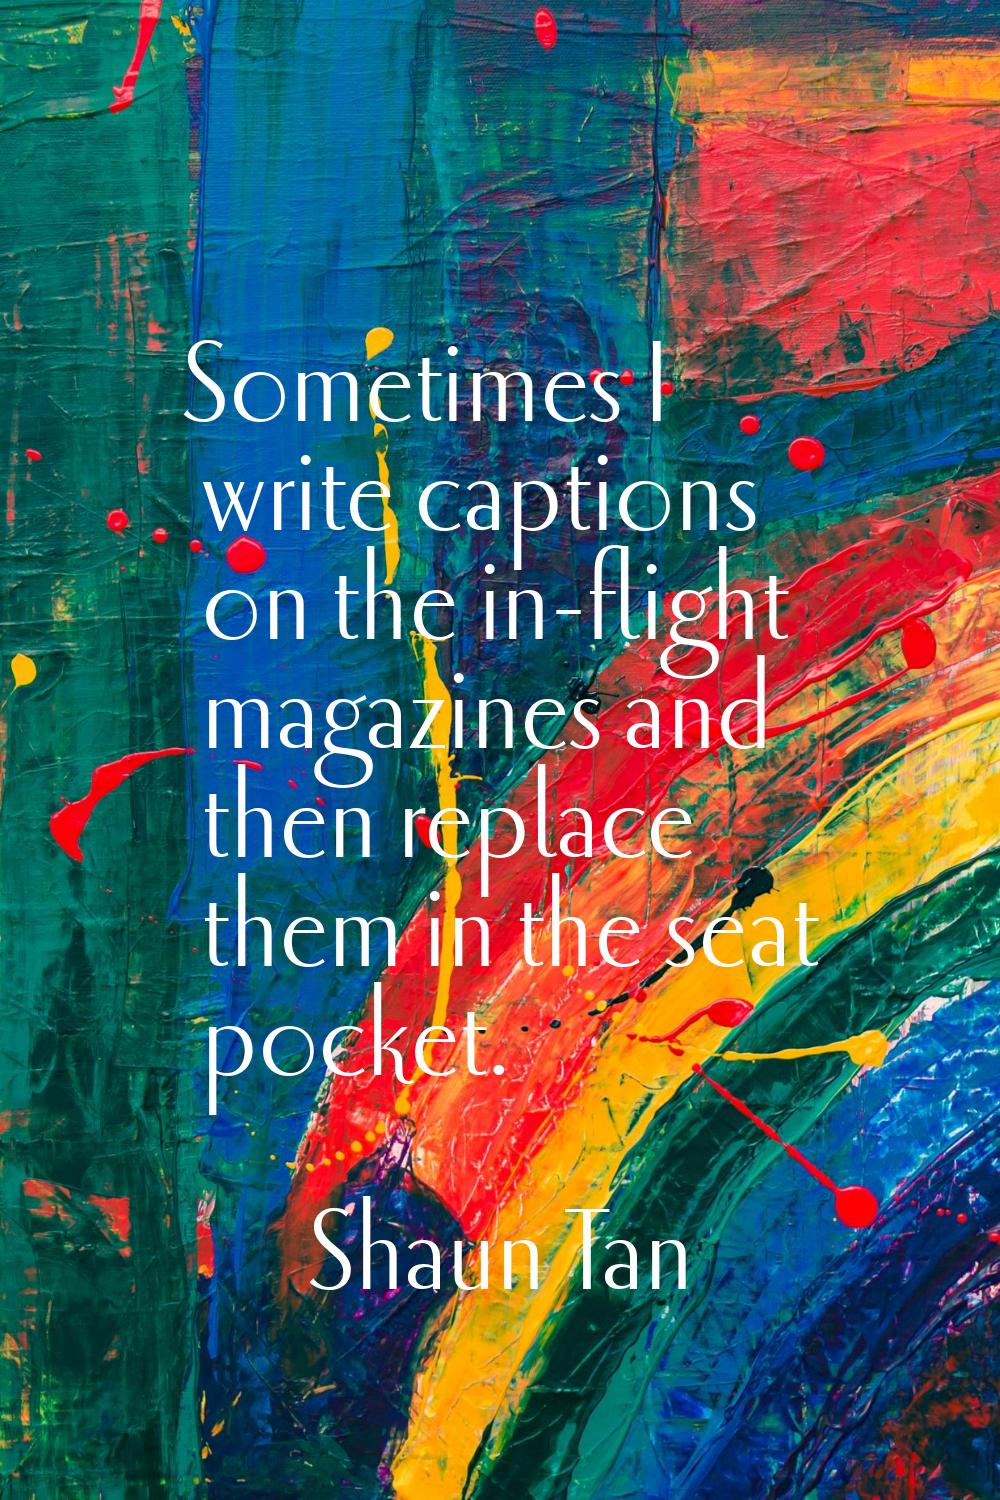 Sometimes I write captions on the in-flight magazines and then replace them in the seat pocket.